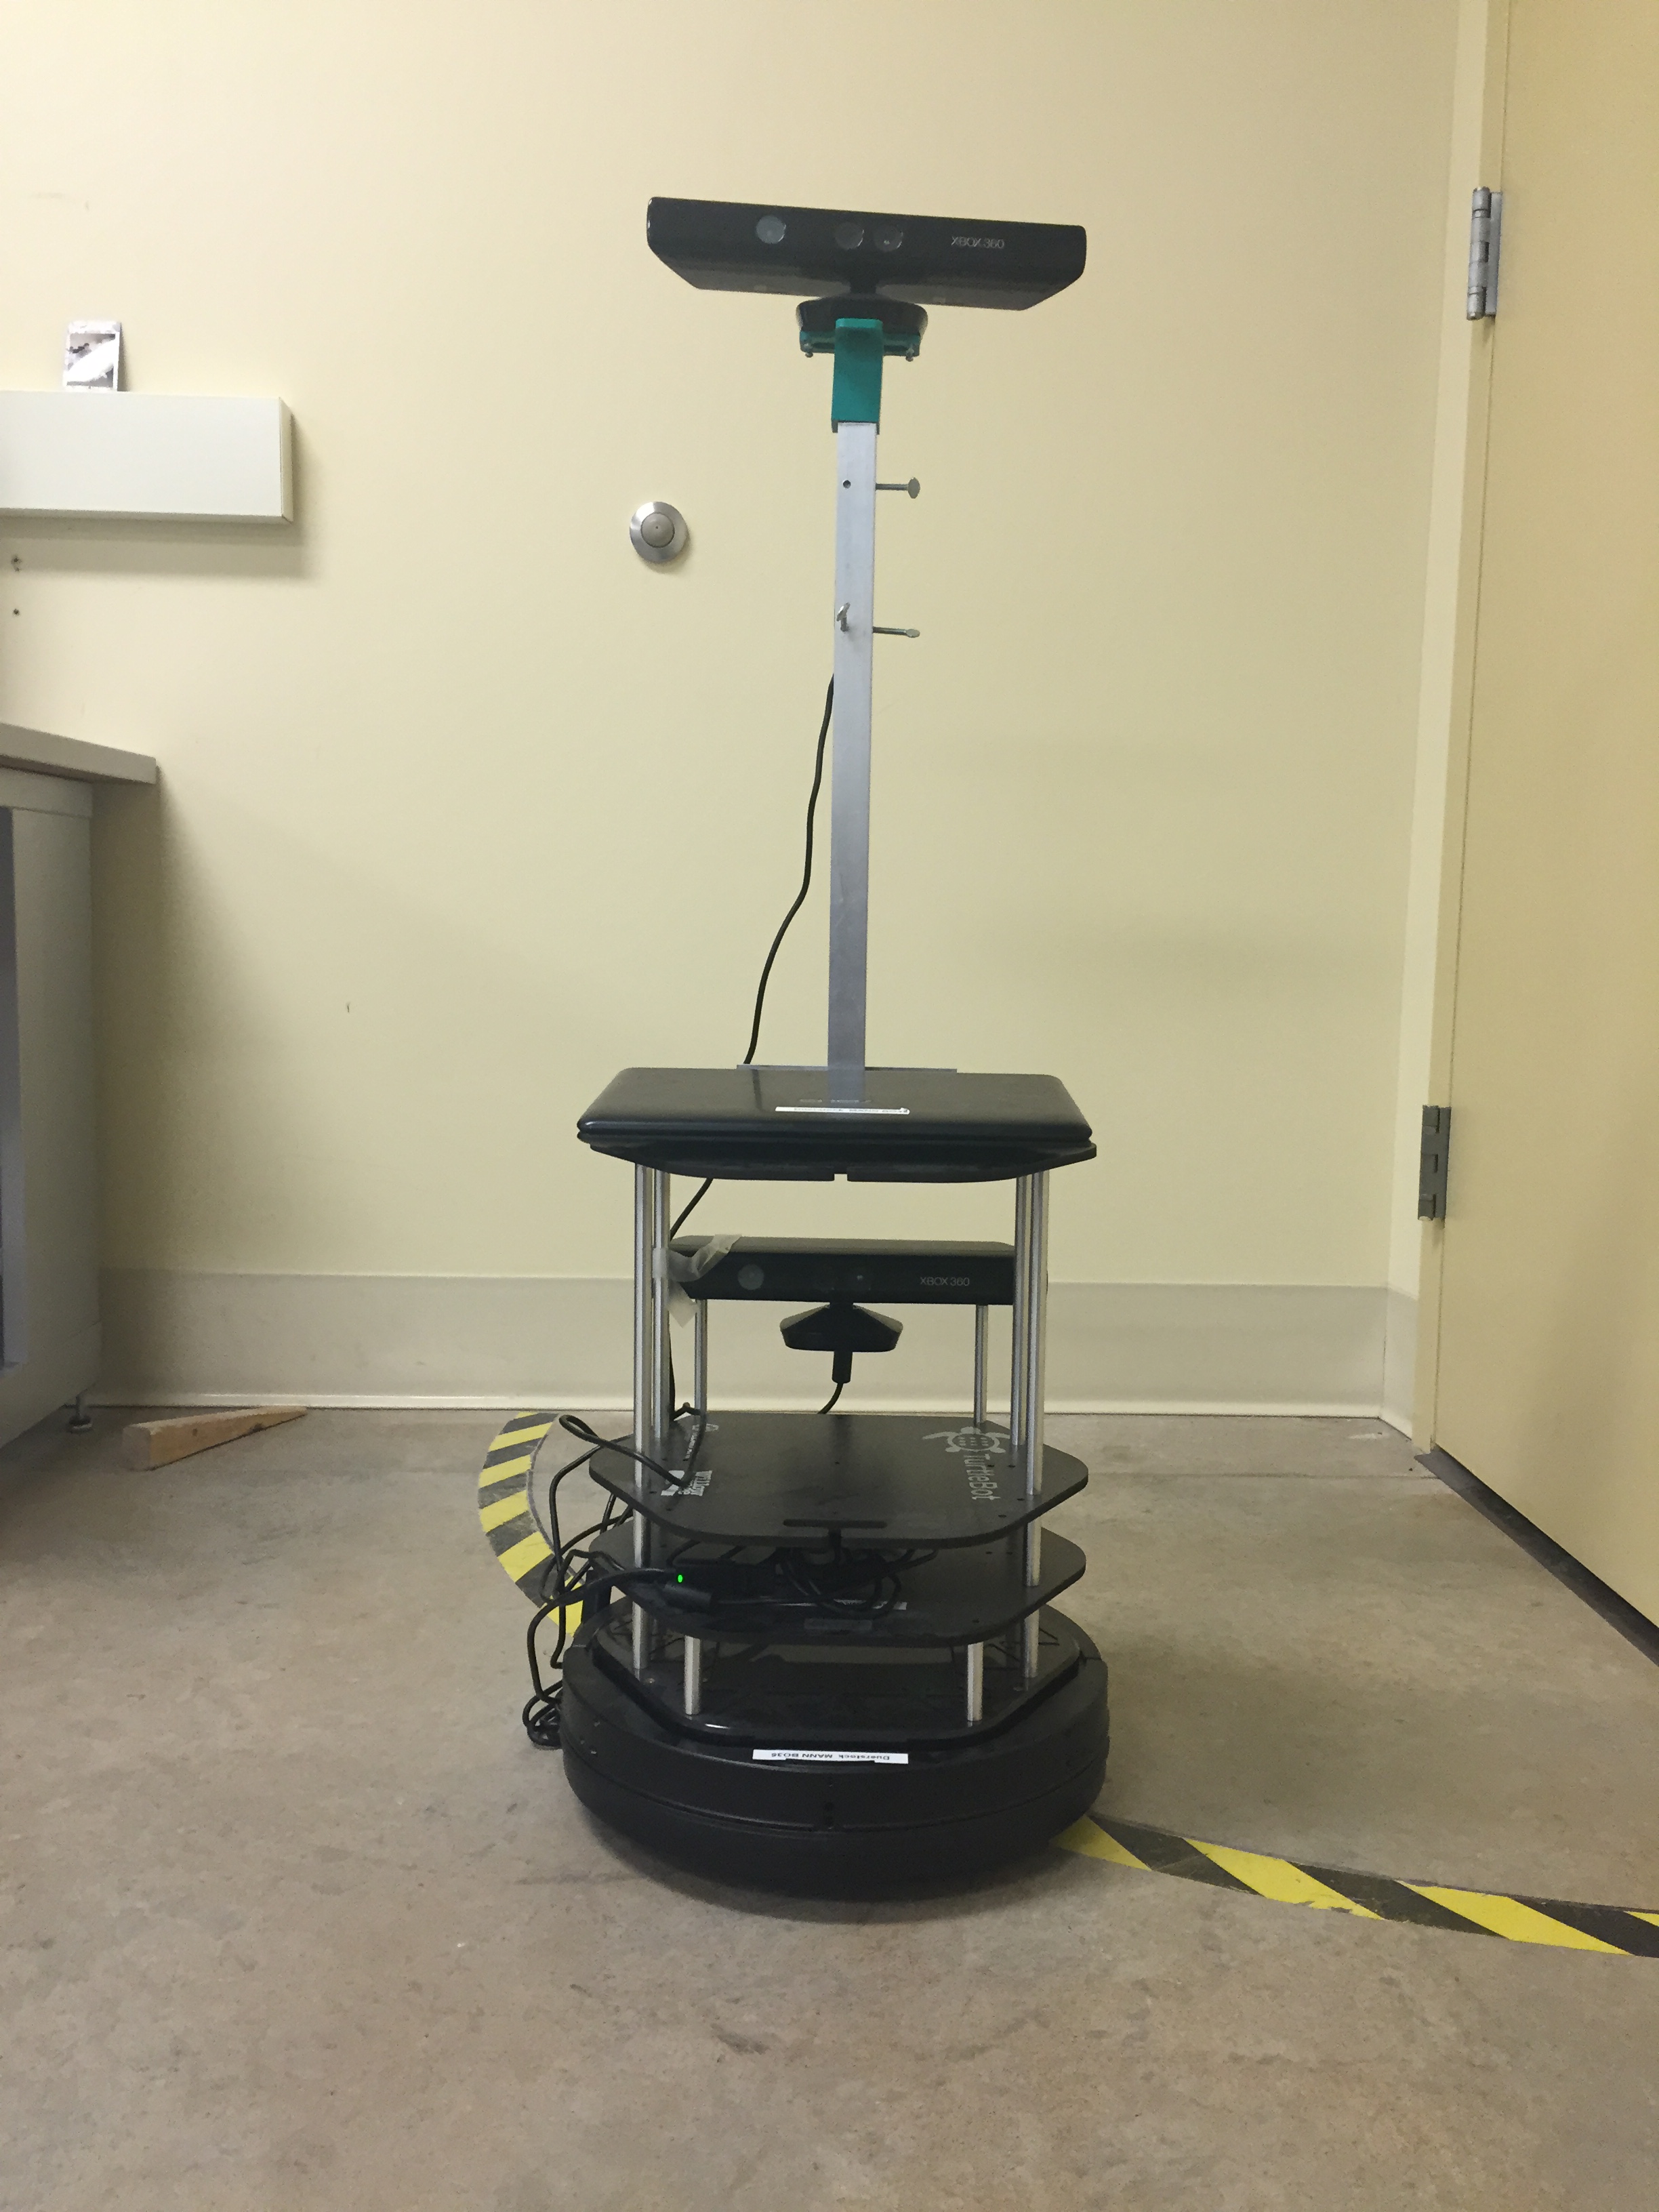 Photo of a mobile robot called  turtlebot